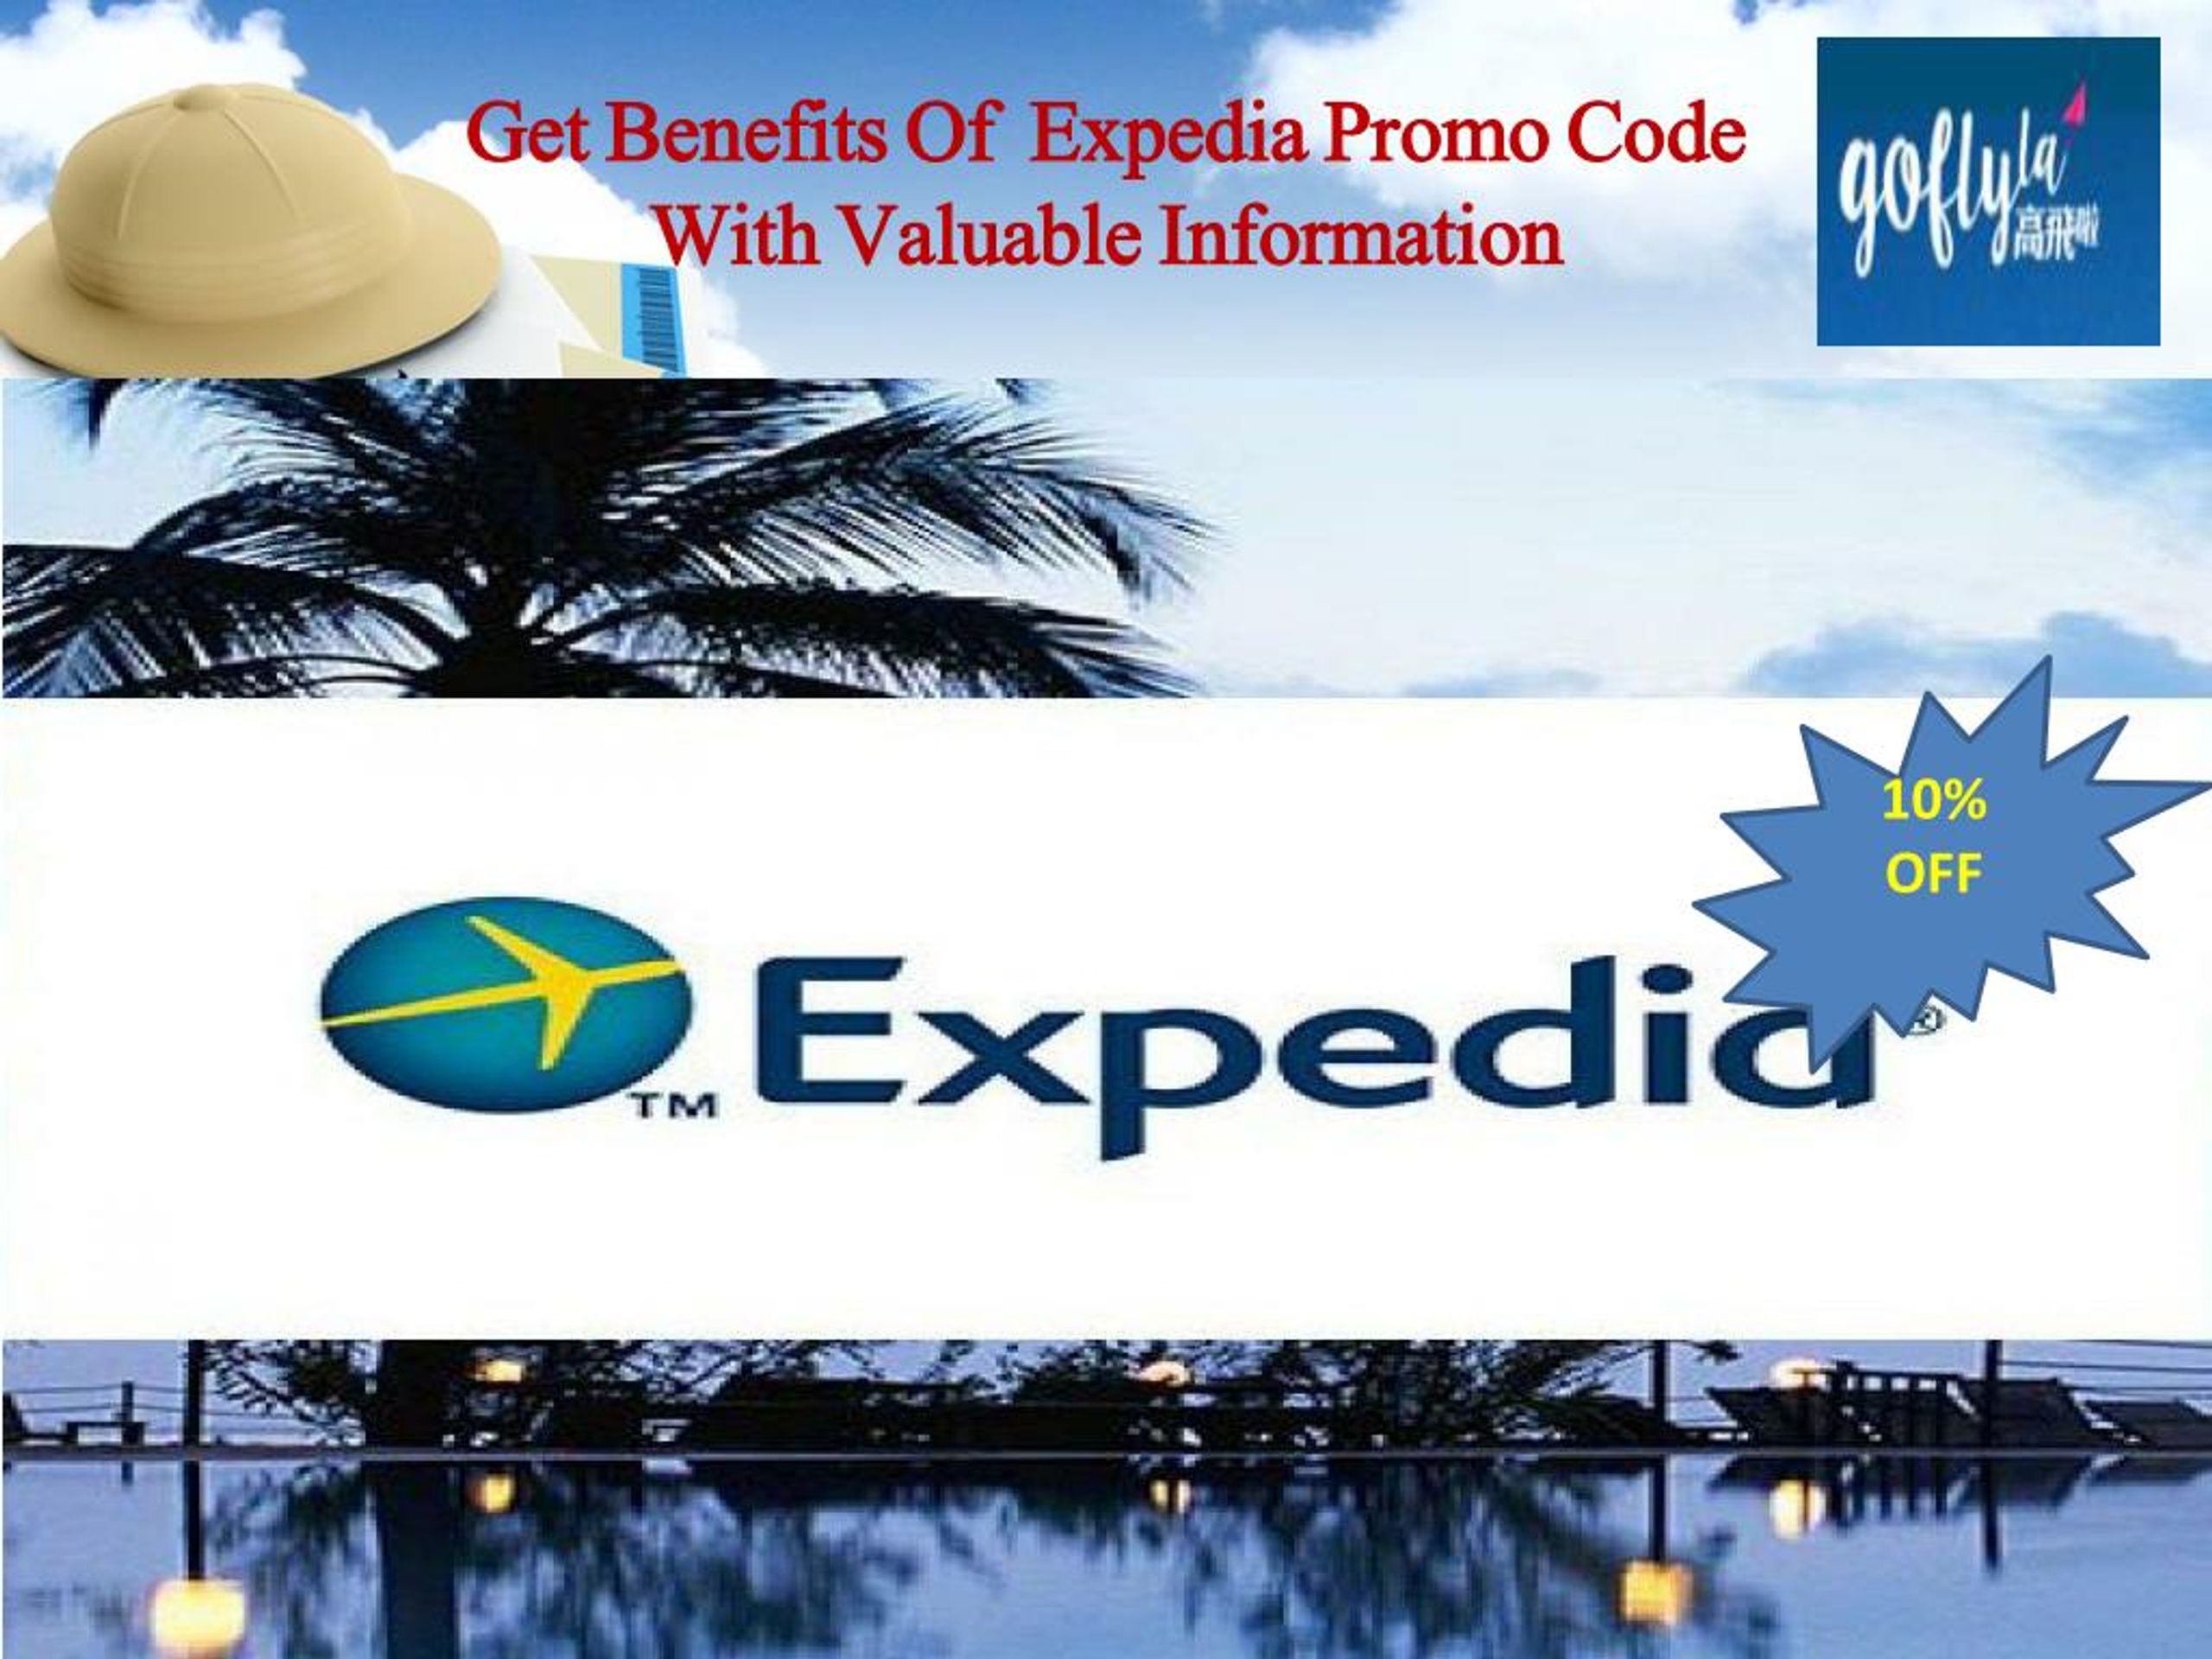 PPT Get Benefits of expedia promo code with valuable information